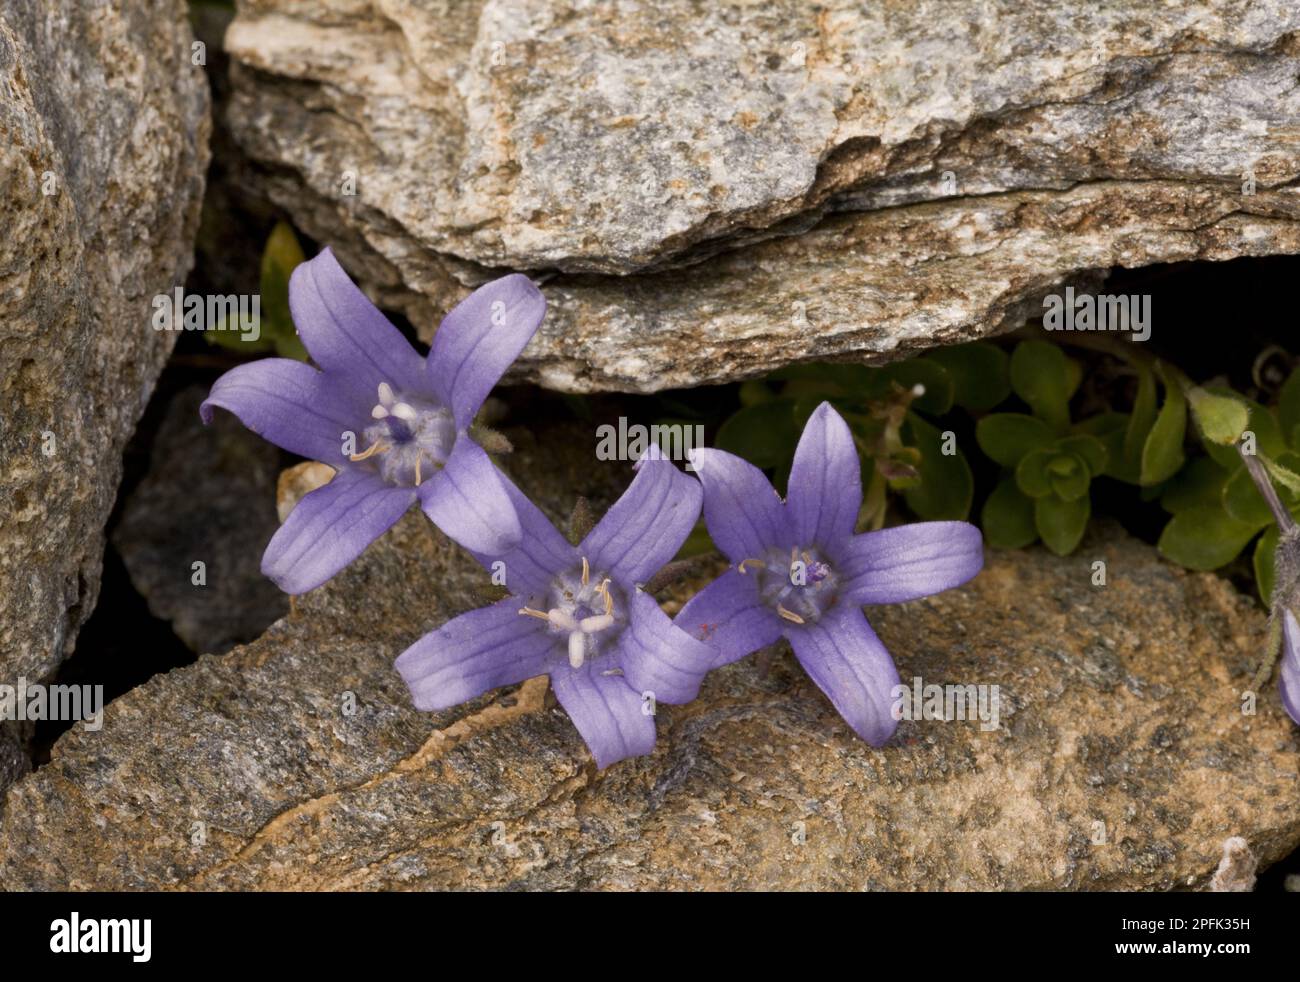 Flowering mont cenis bellflower (Campanula cenisia), growing between rocks, Mont Cenis, French Alps, France Stock Photo